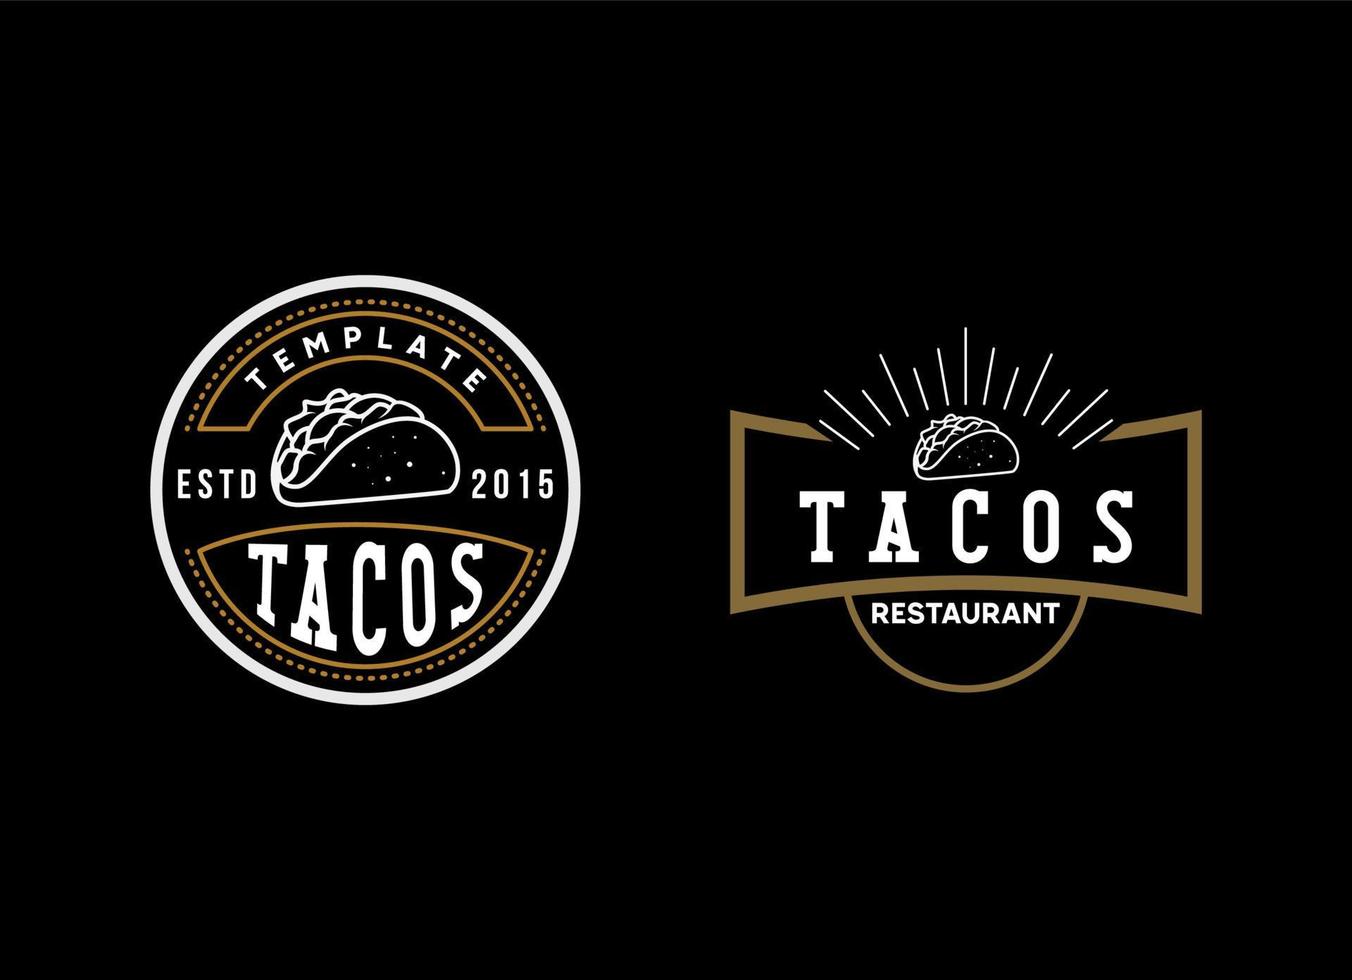 Old style and vintage tacos logo vector